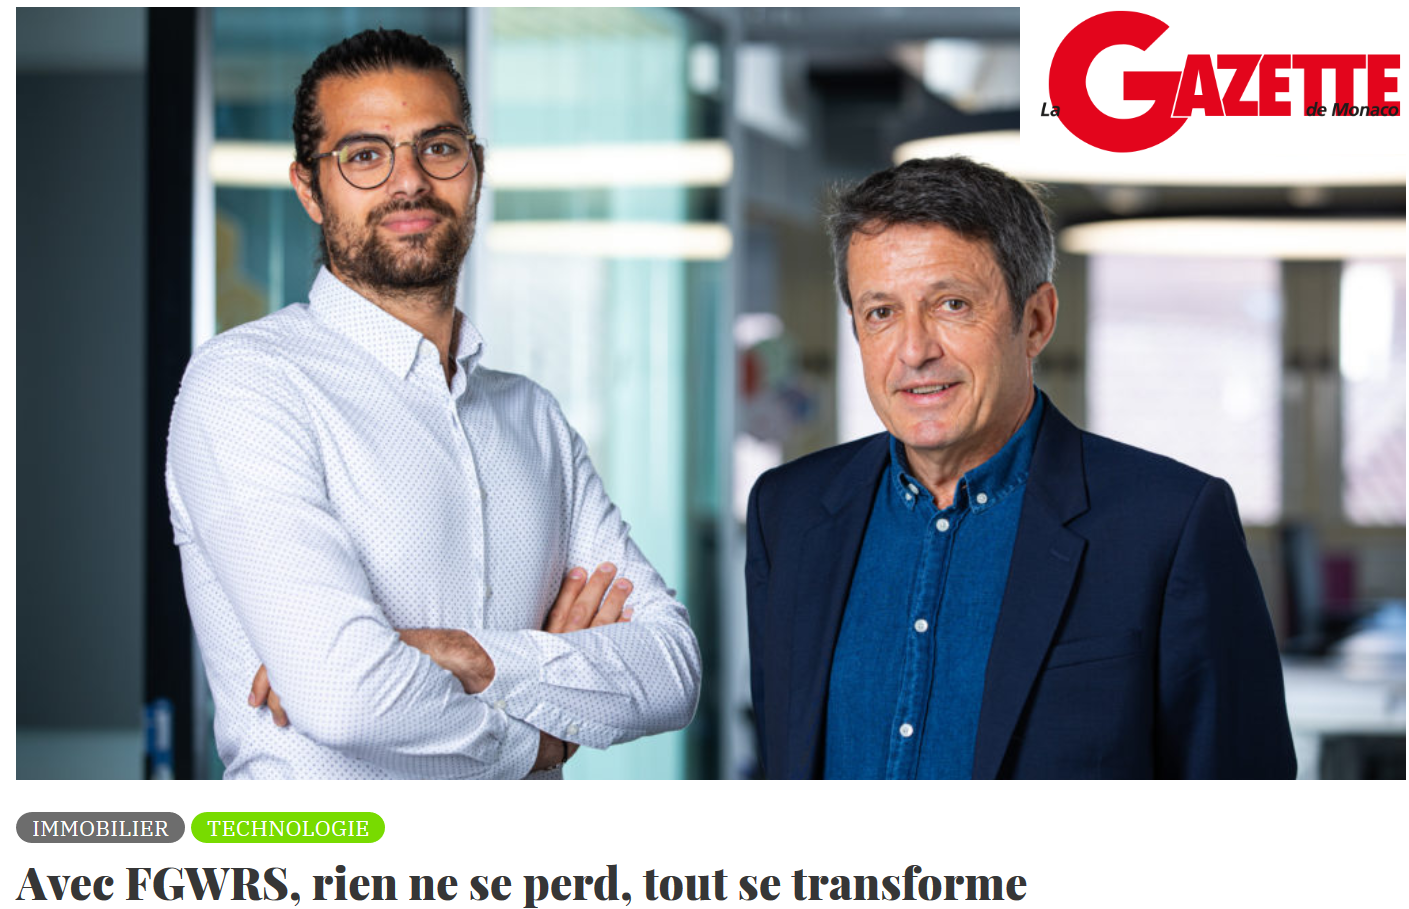 Monaco Media: “With FGWRS®, Nothing Is Lost, Everything Is Transformed.”